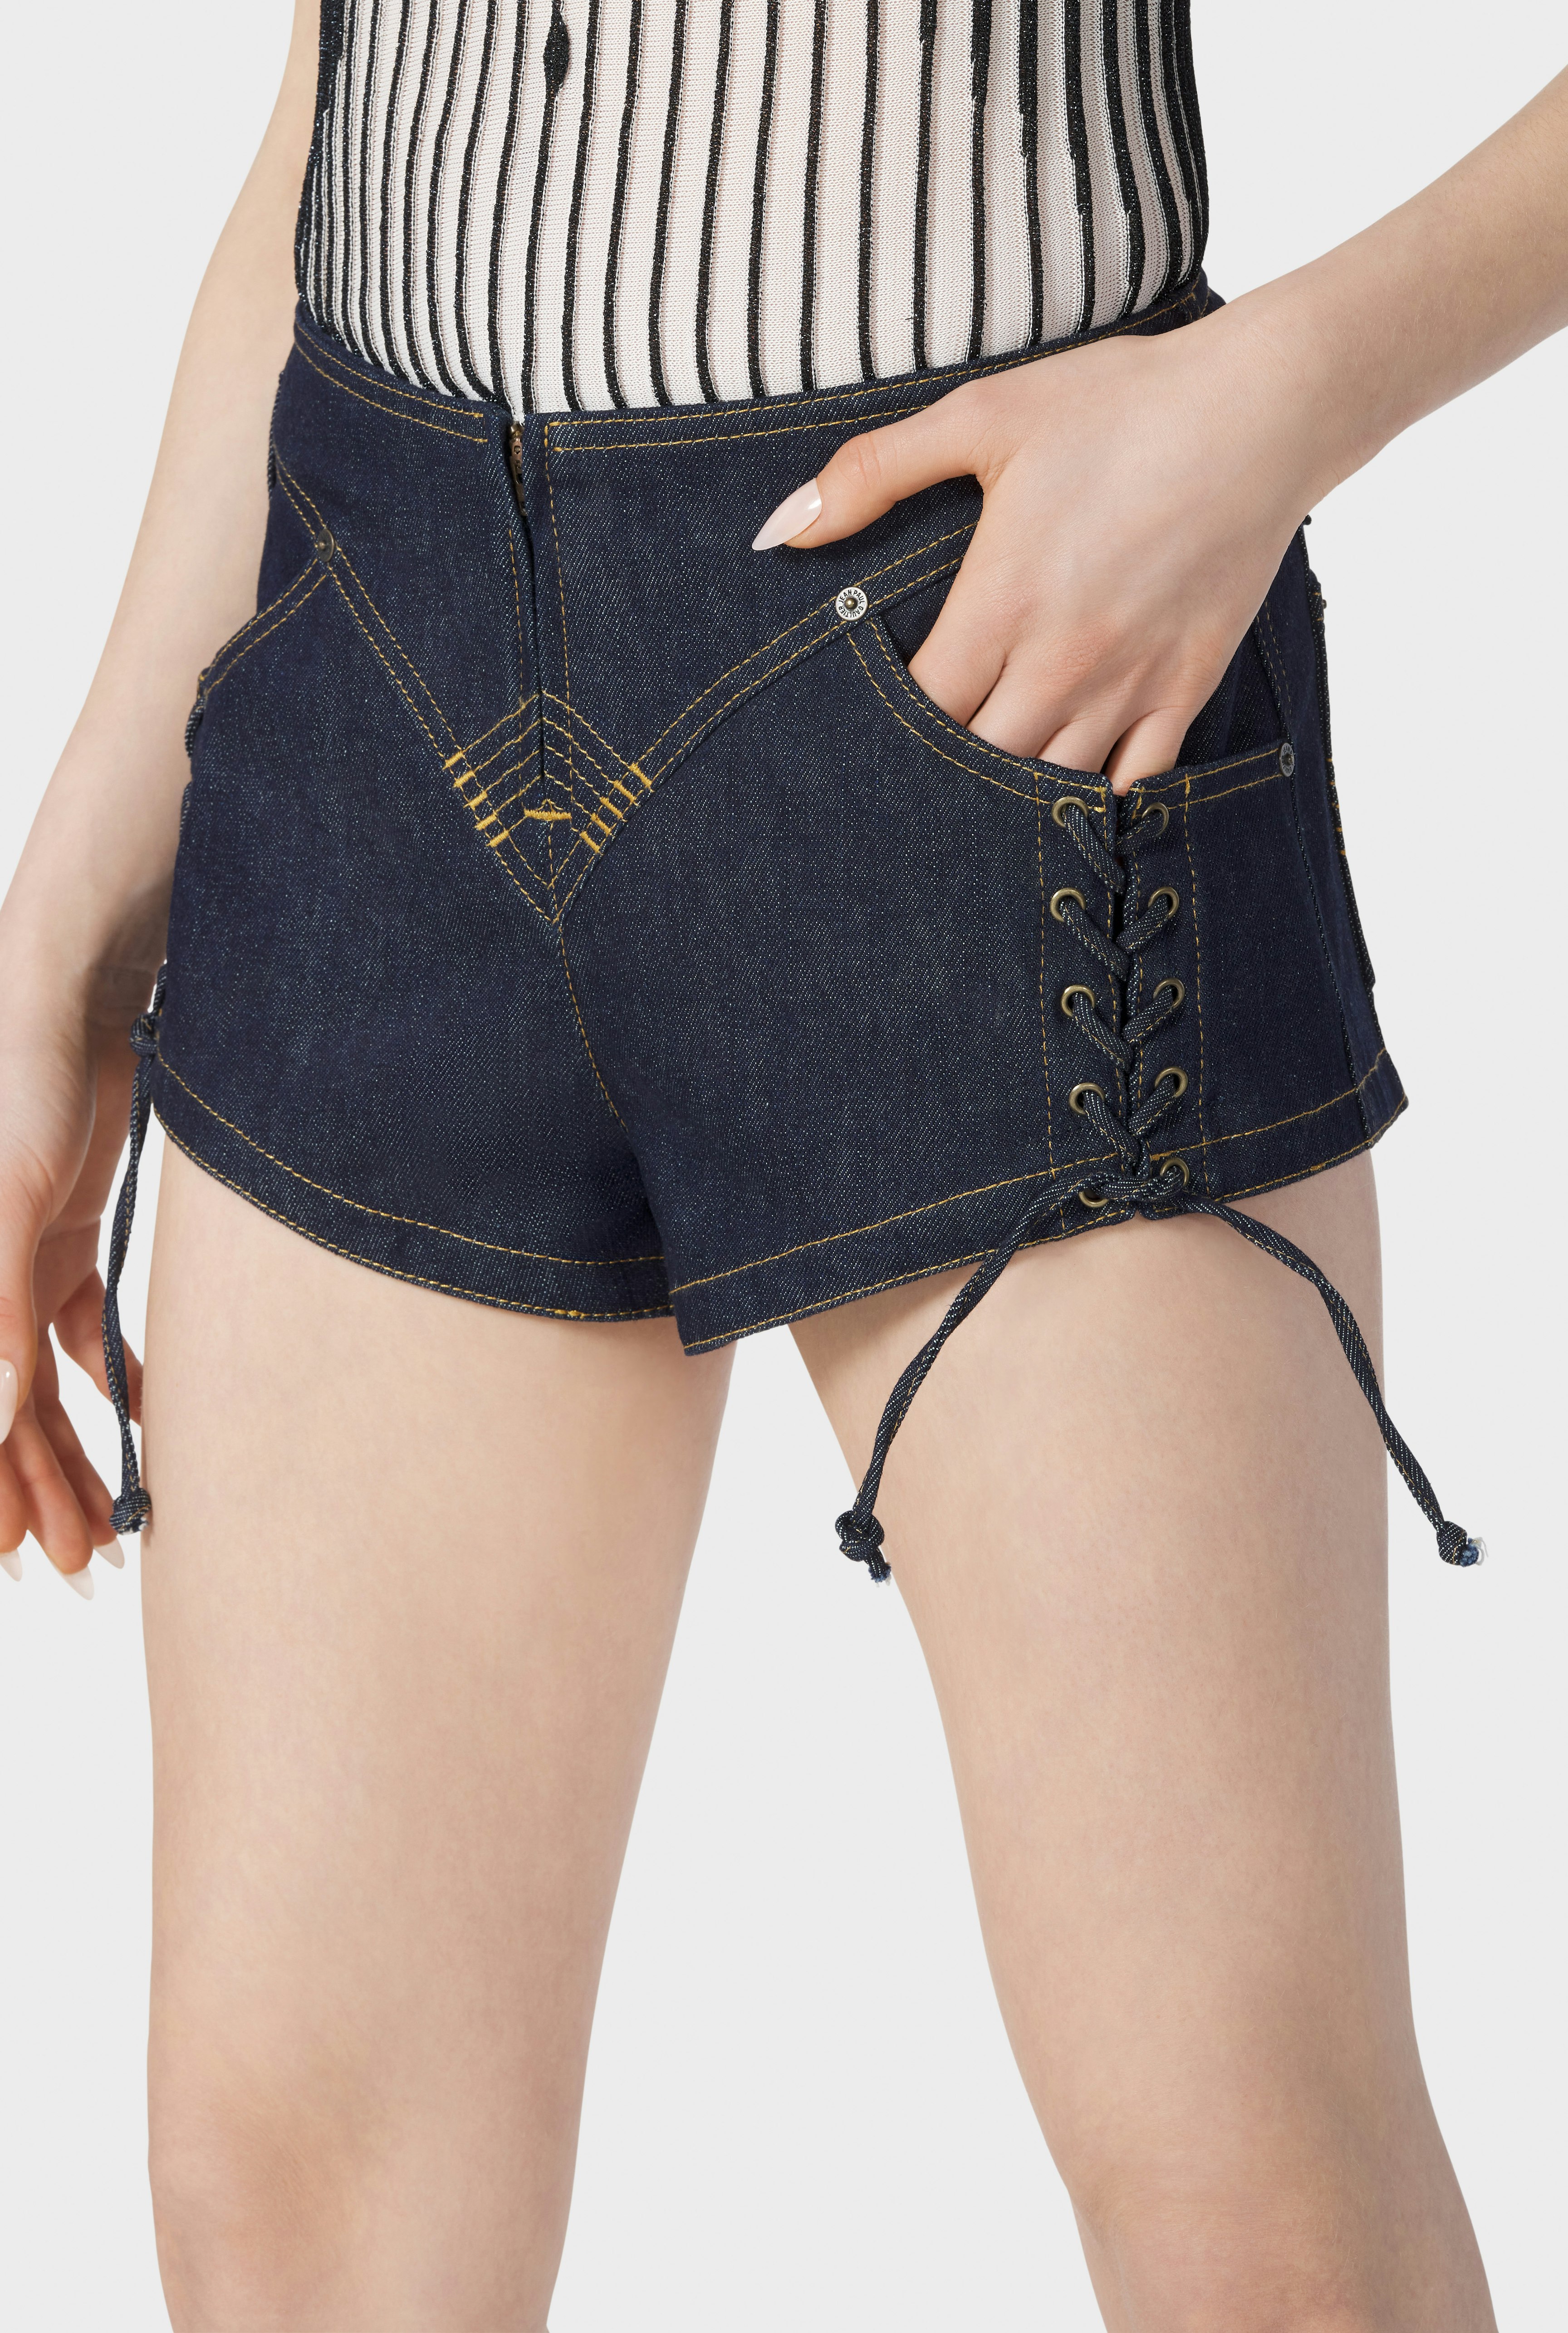 The Lace-Up Denim Shorts hover